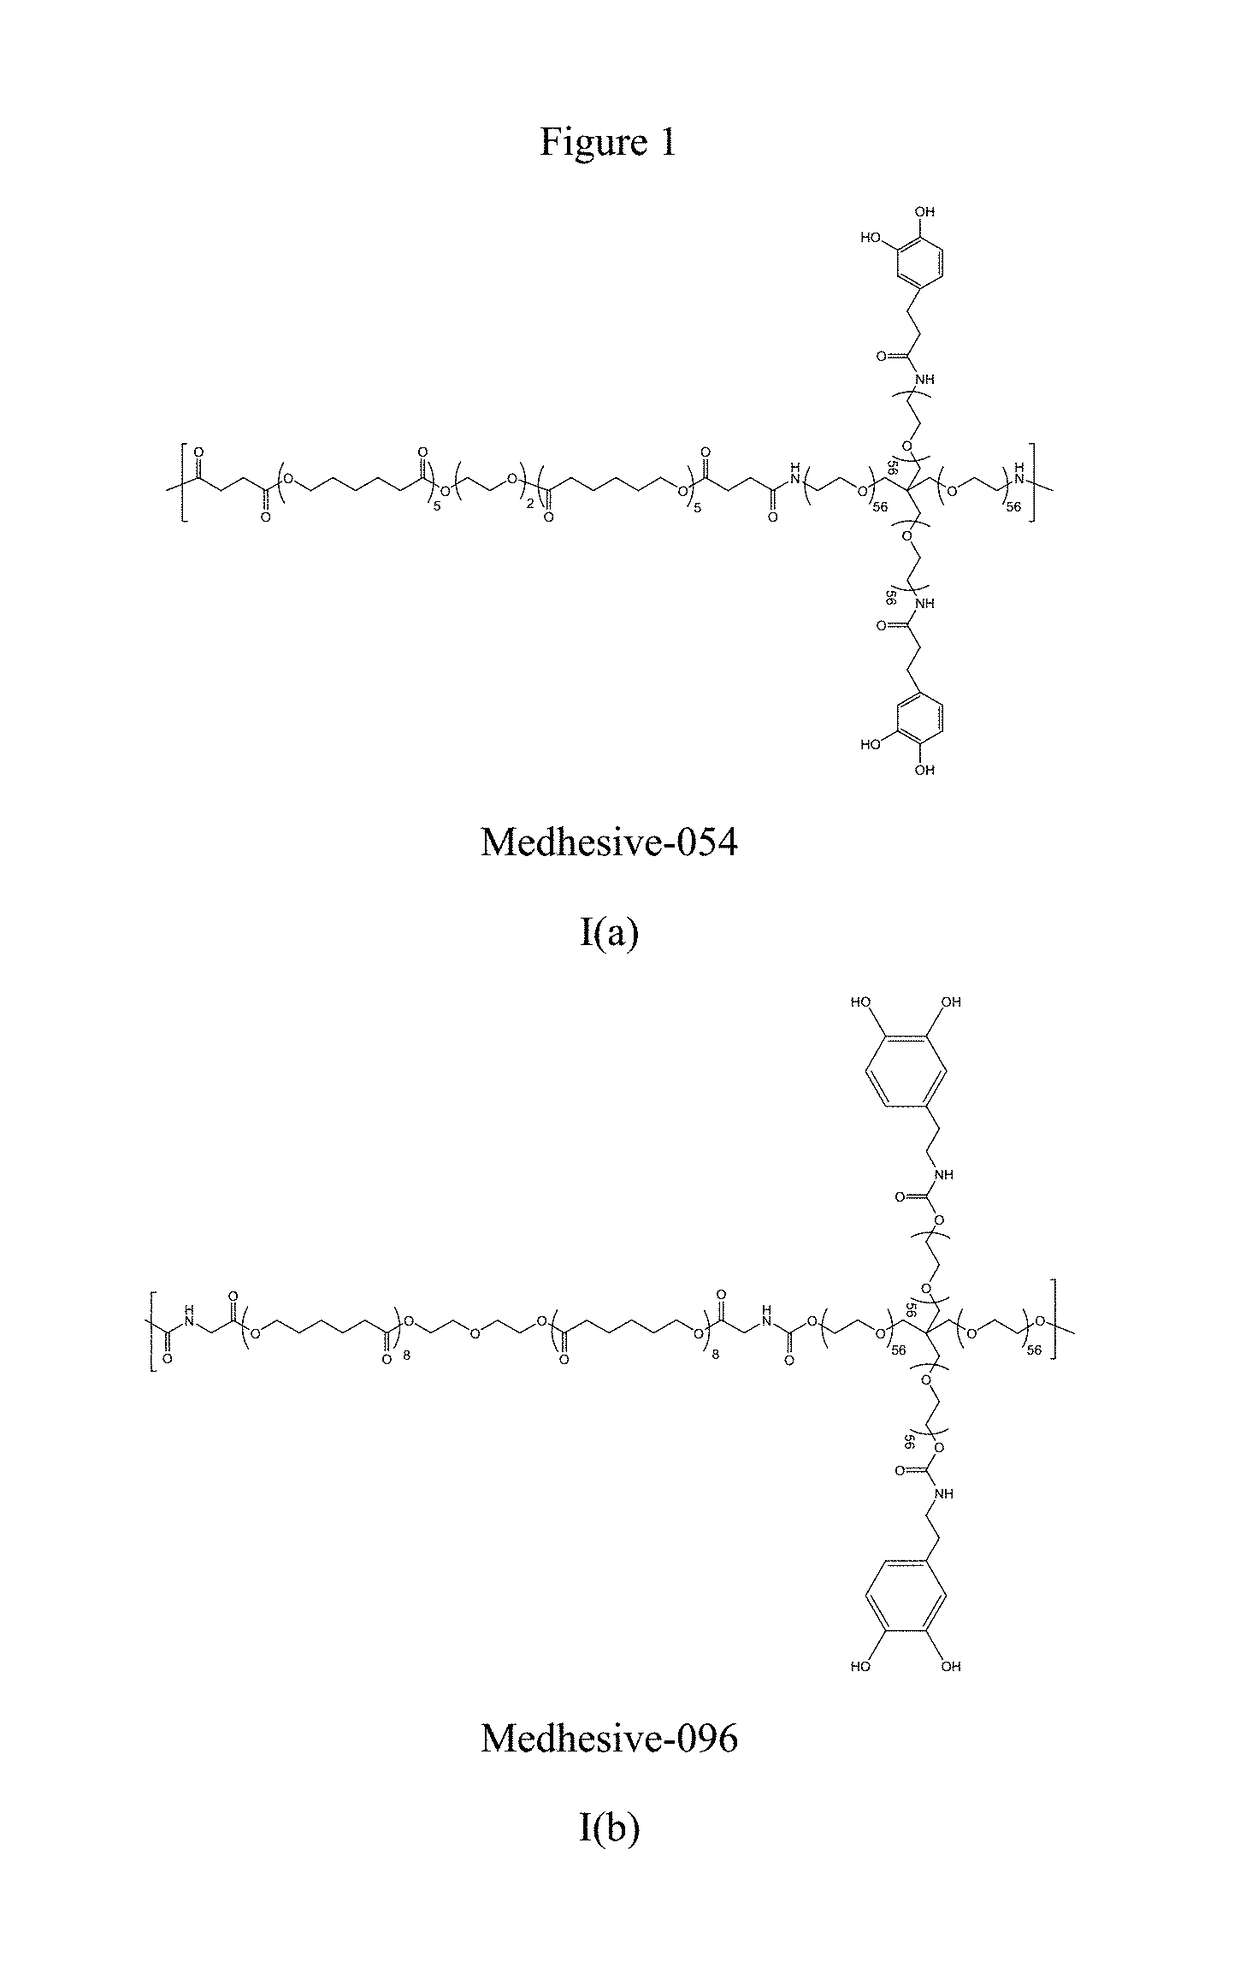 Multibranched bioadhesive compounds and synthetic methods therefor